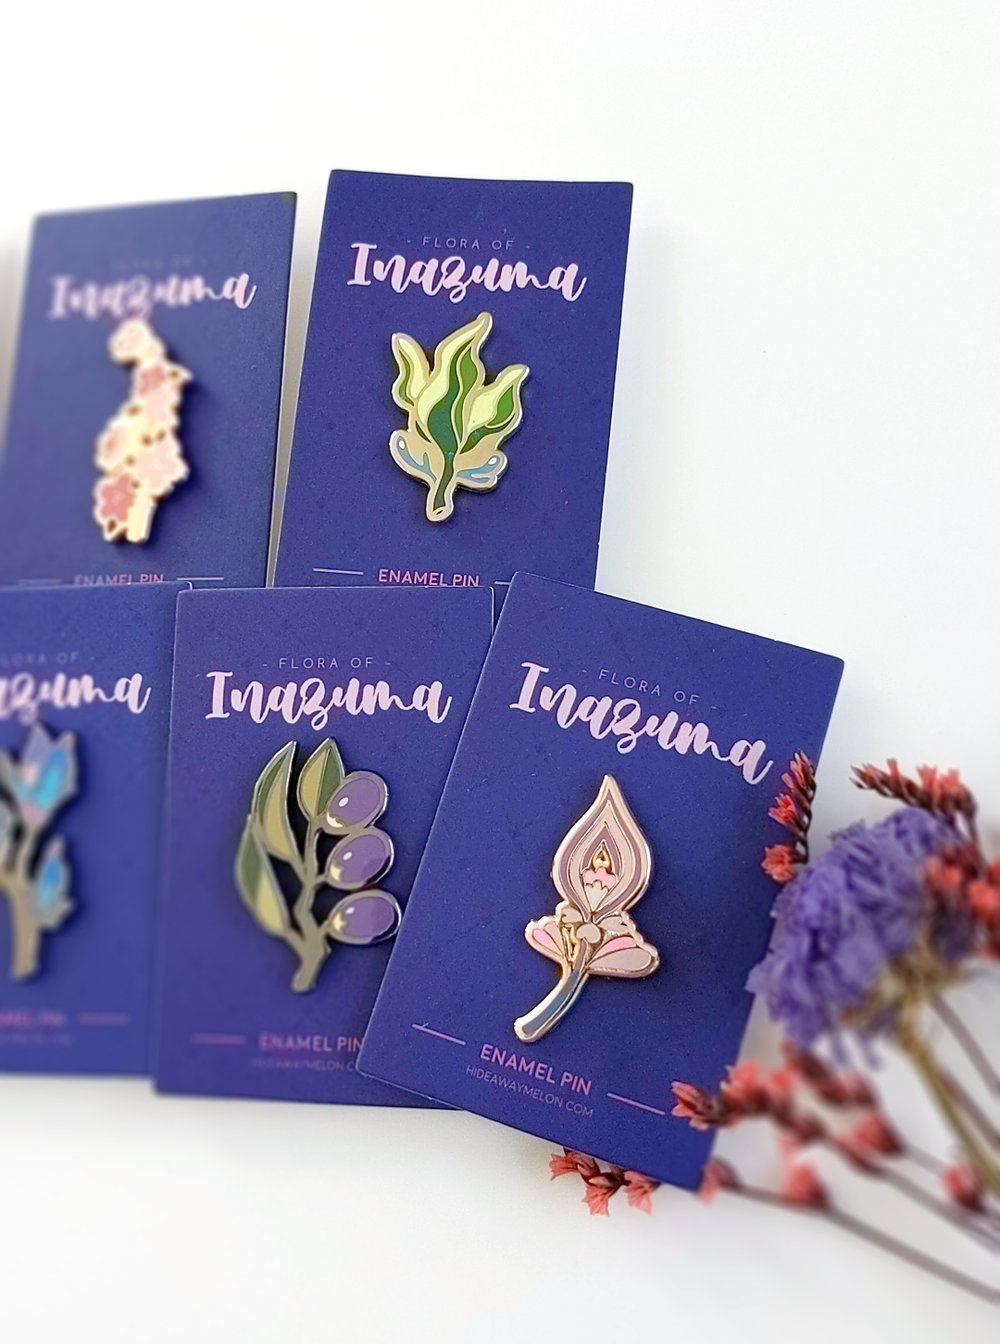 Liyue Flowers Enamel Pins Custom Genshin Impact Game Local Specialties  Brooches Lapel Badges Plant Jewelry Gift